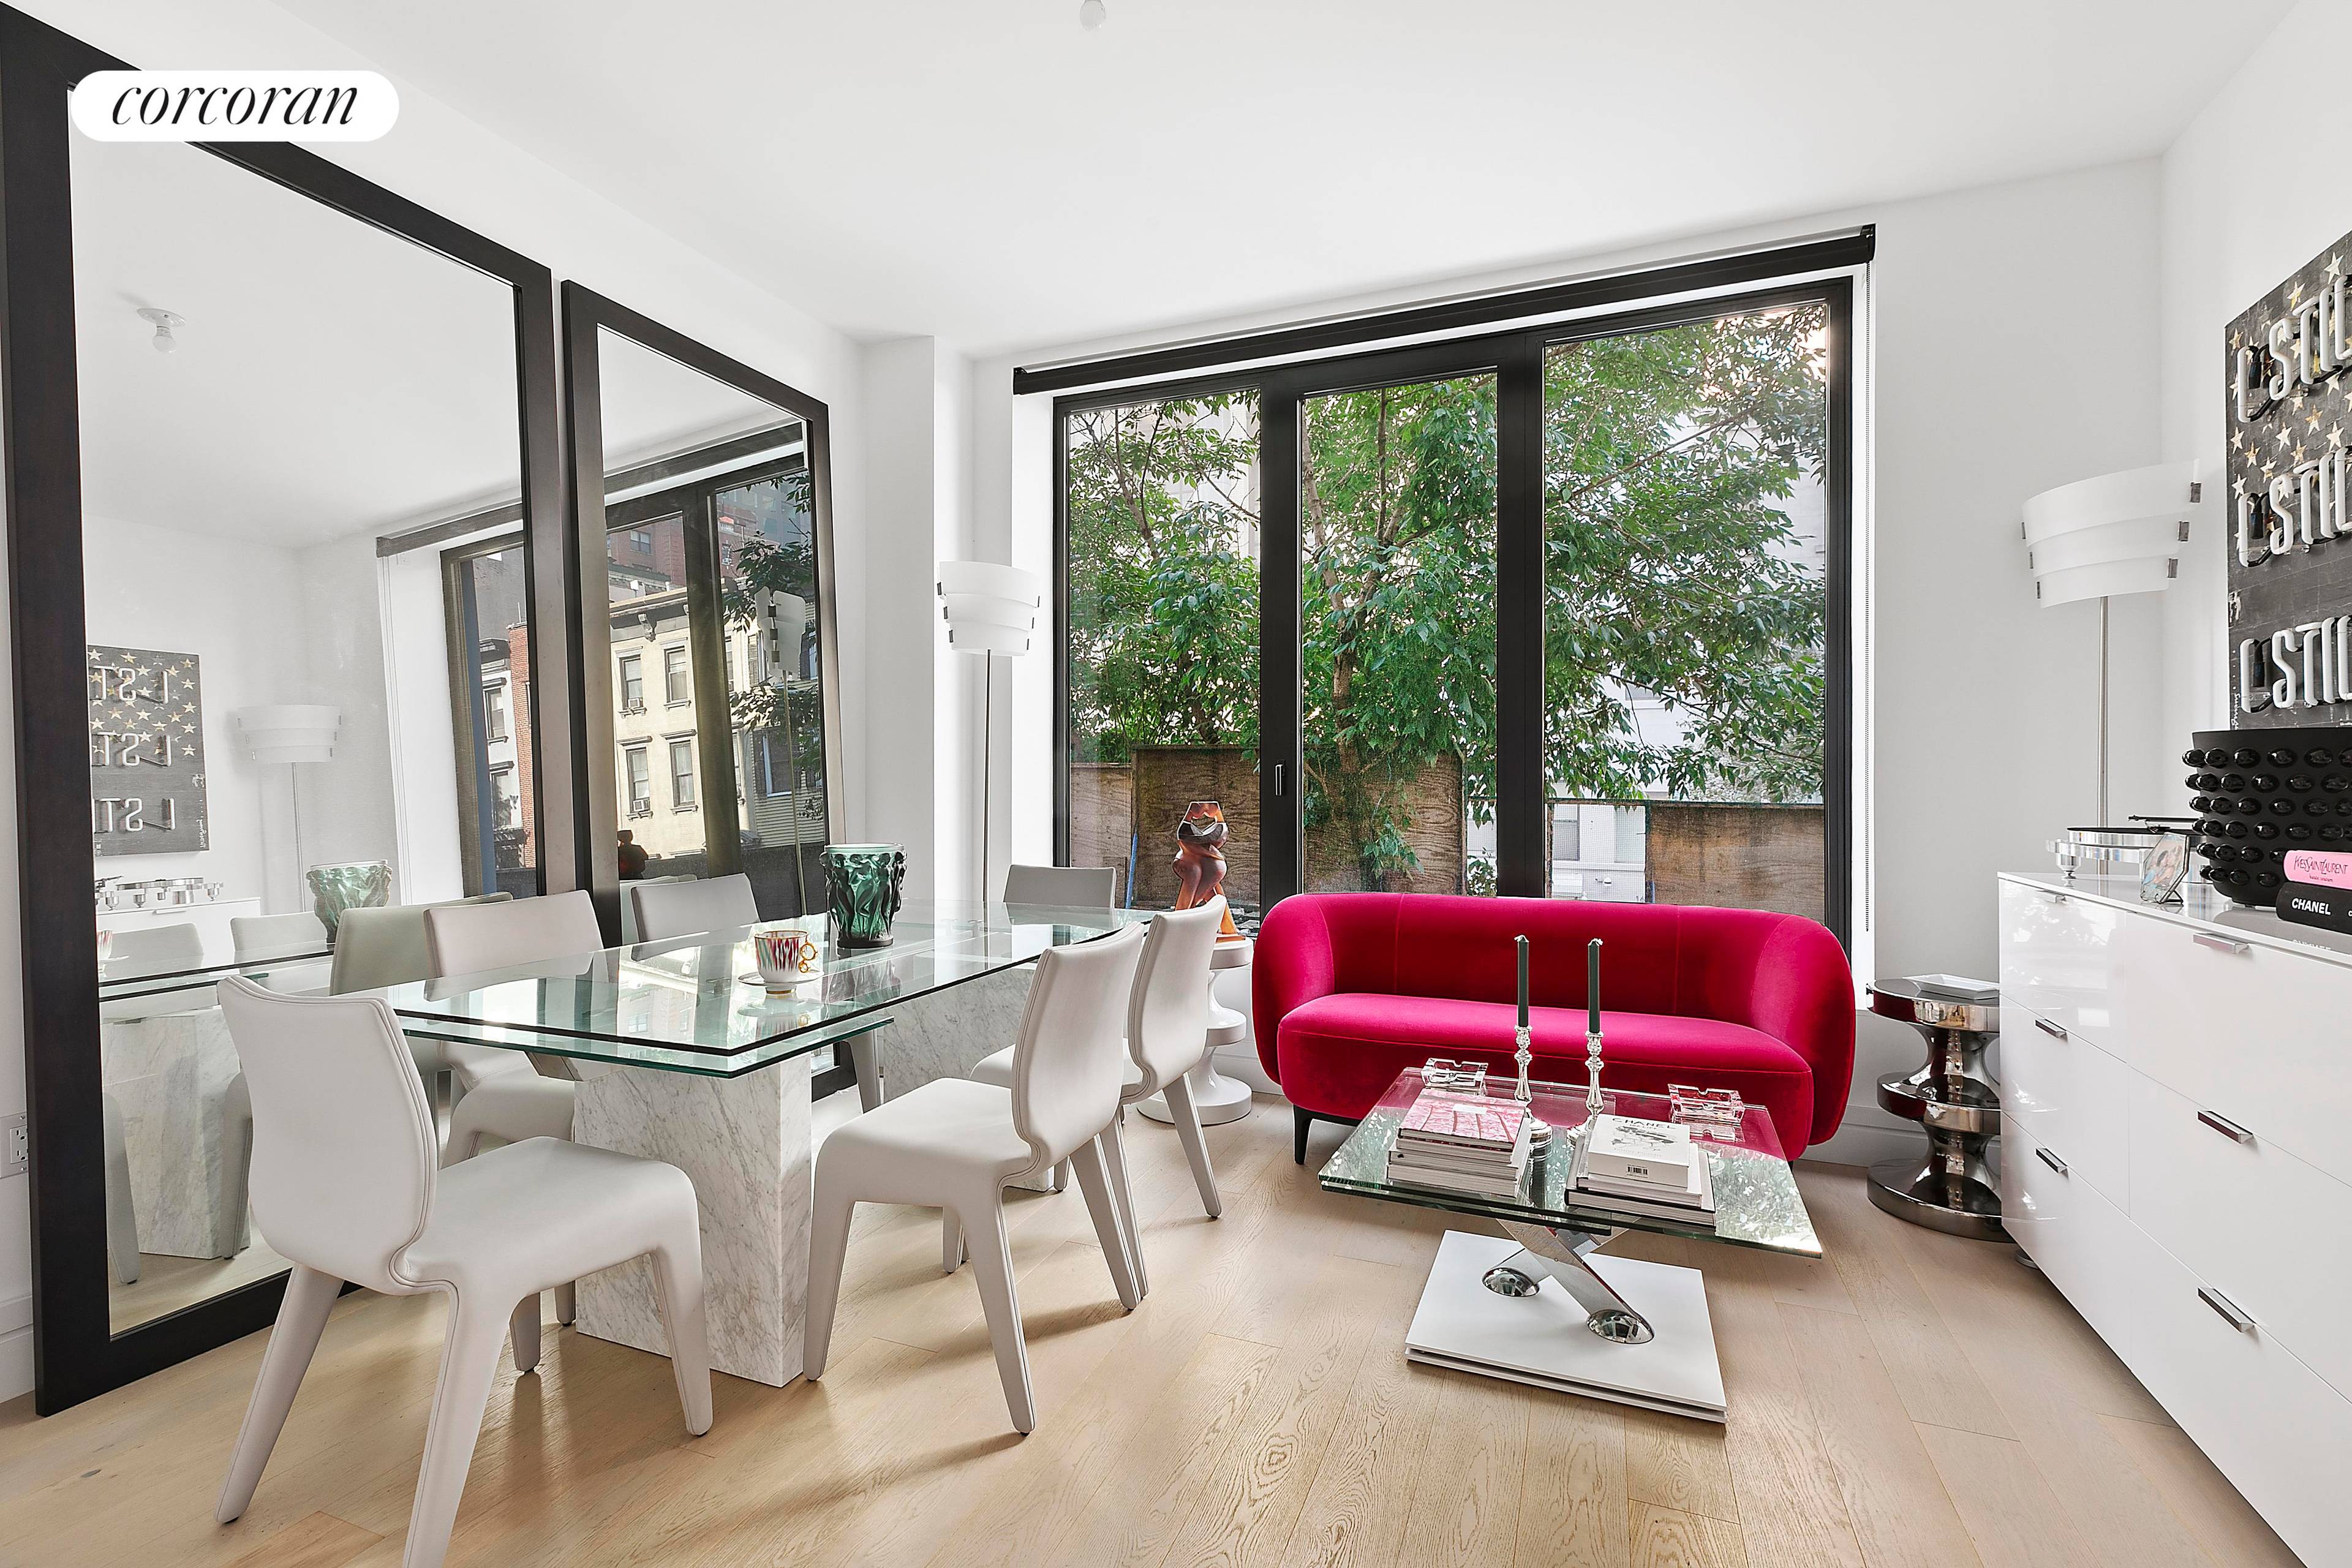 Residence 2B at The Lexi, a remarkable studio residence located at the heart of Kips Bay 165 Lexington Avenue.